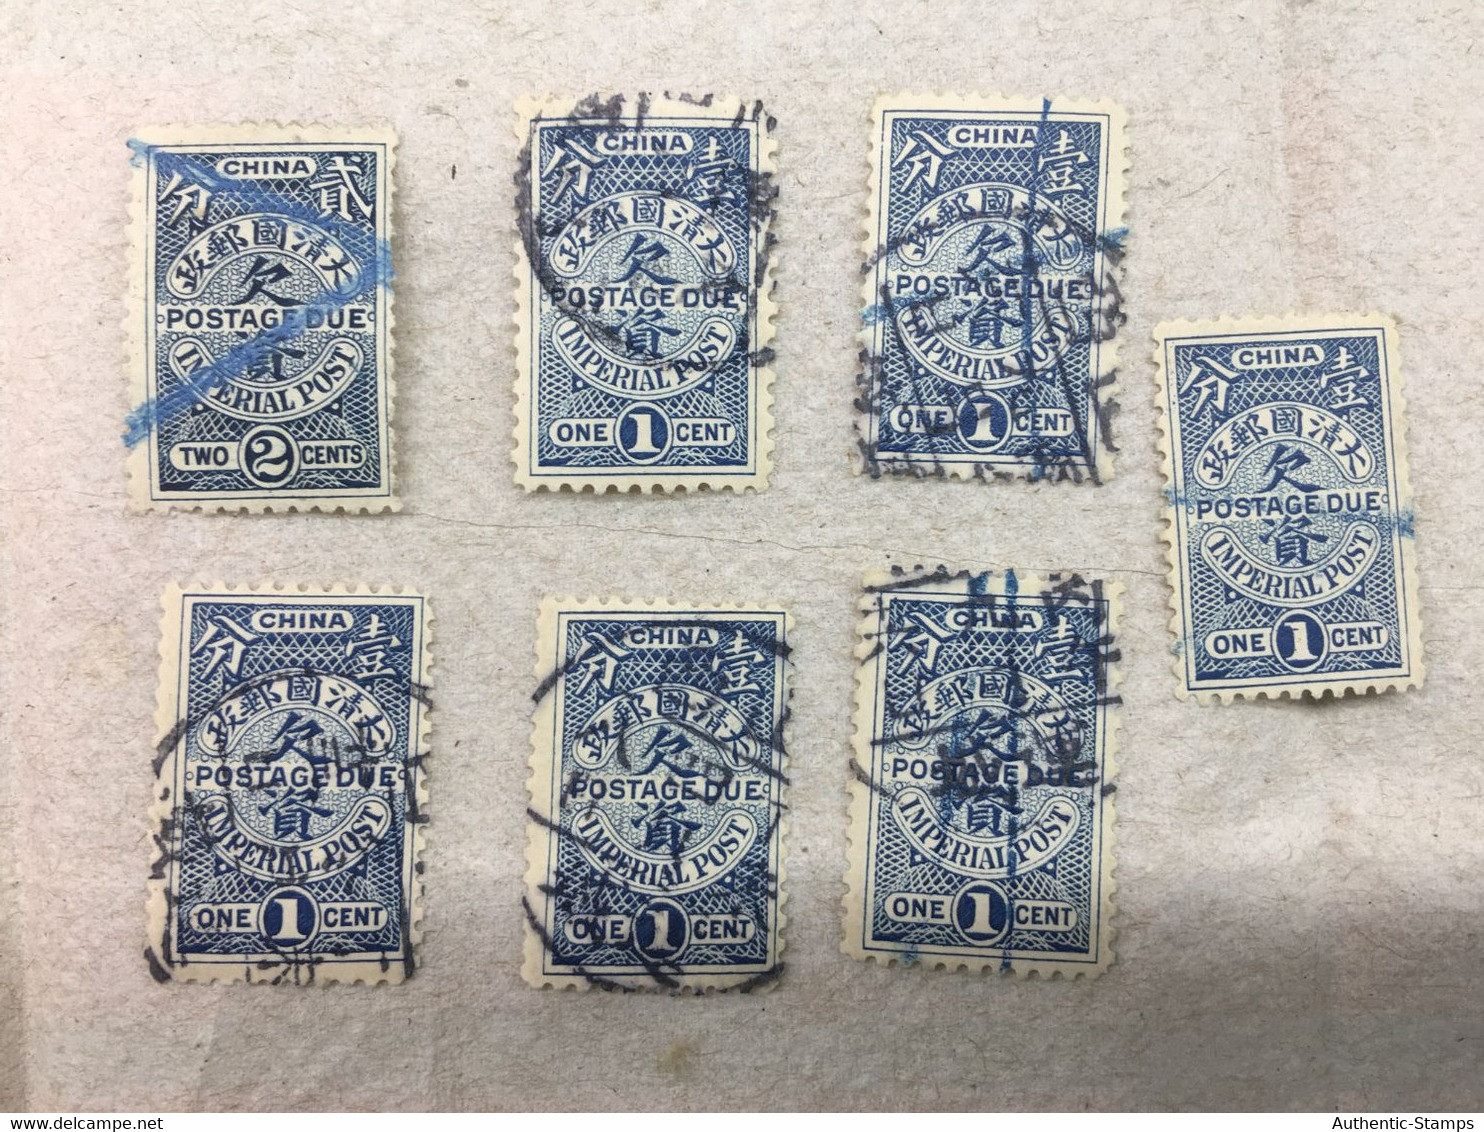 CHINA STAMP, Imperial, USED, TIMBRO, STEMPEL, CINA, CHINE, LIST 5192 - Oblitérés